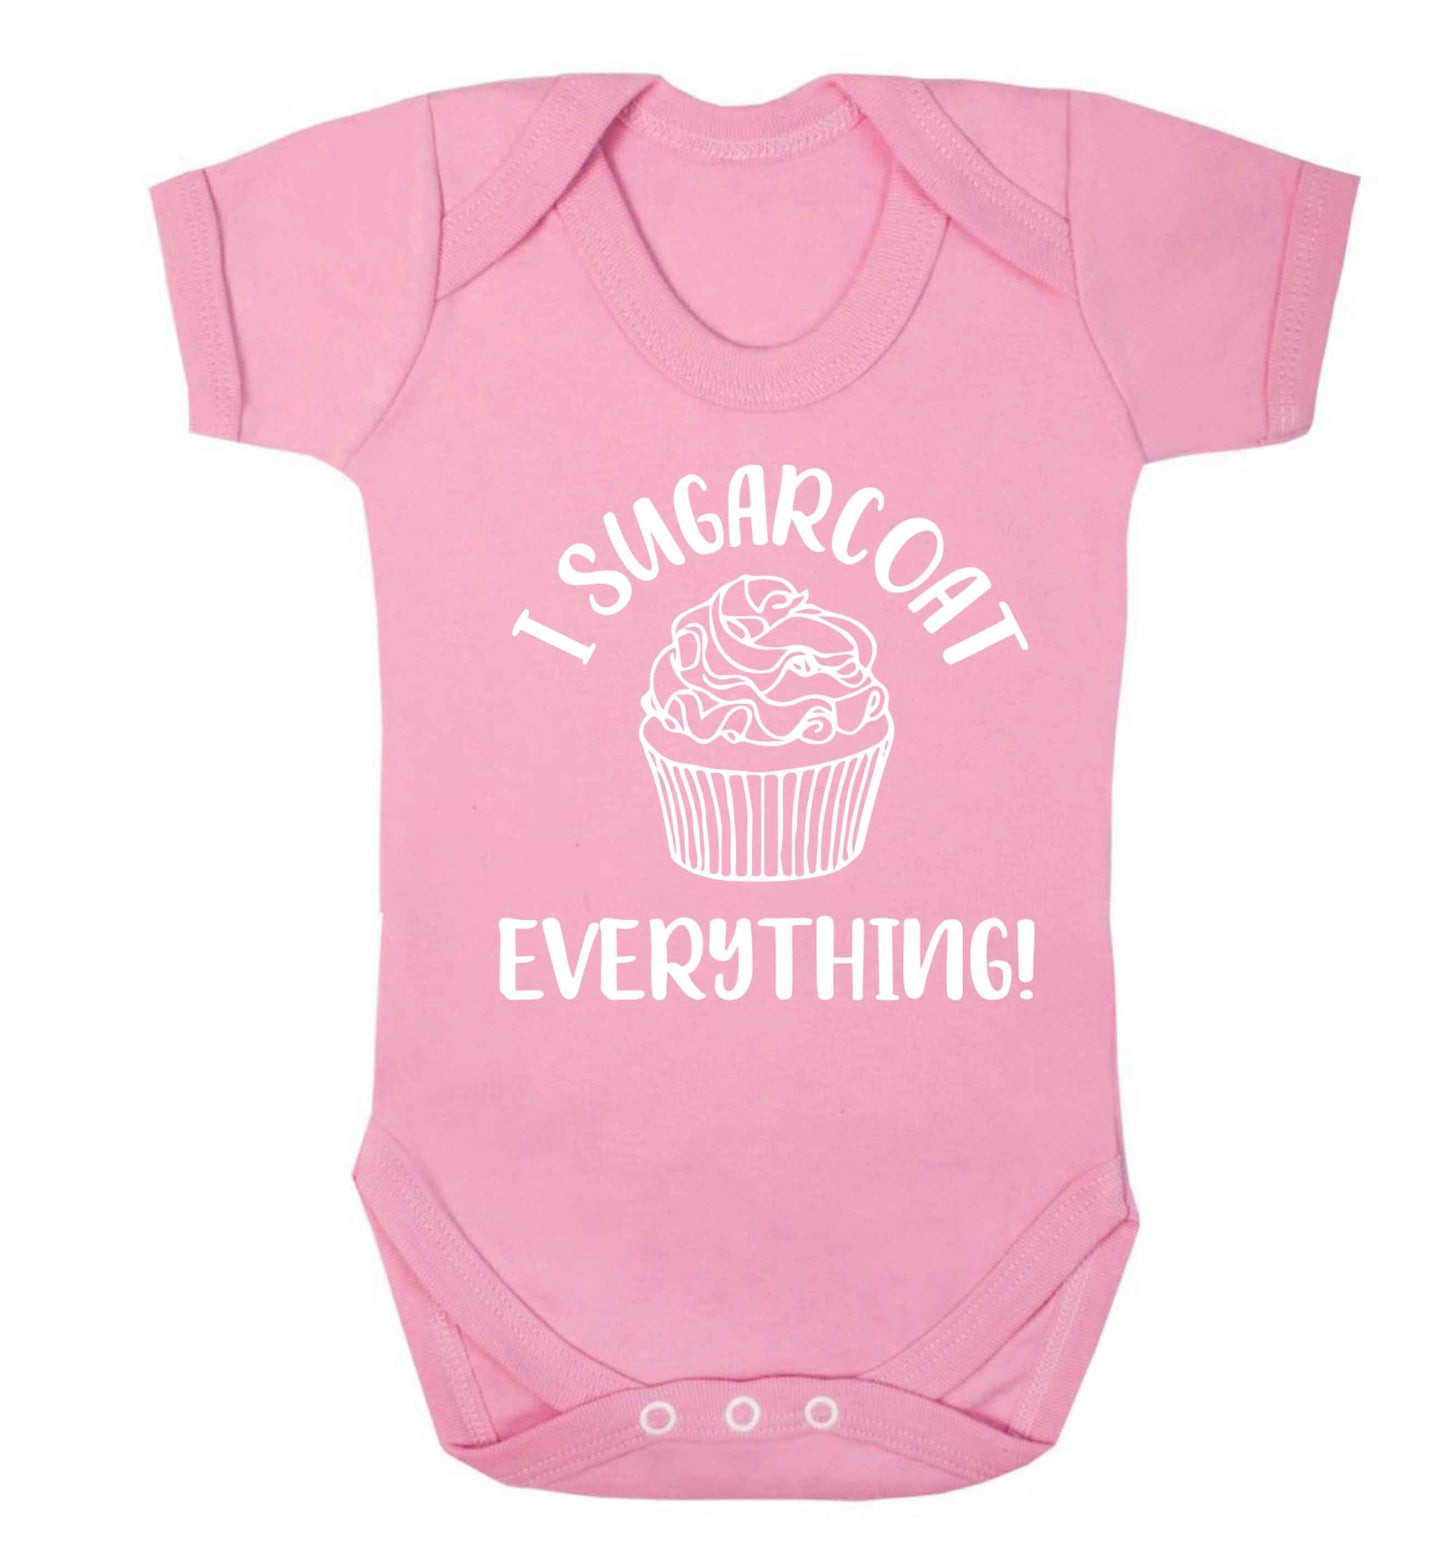 I sugarcoat everything Baby Vest pale pink 18-24 months